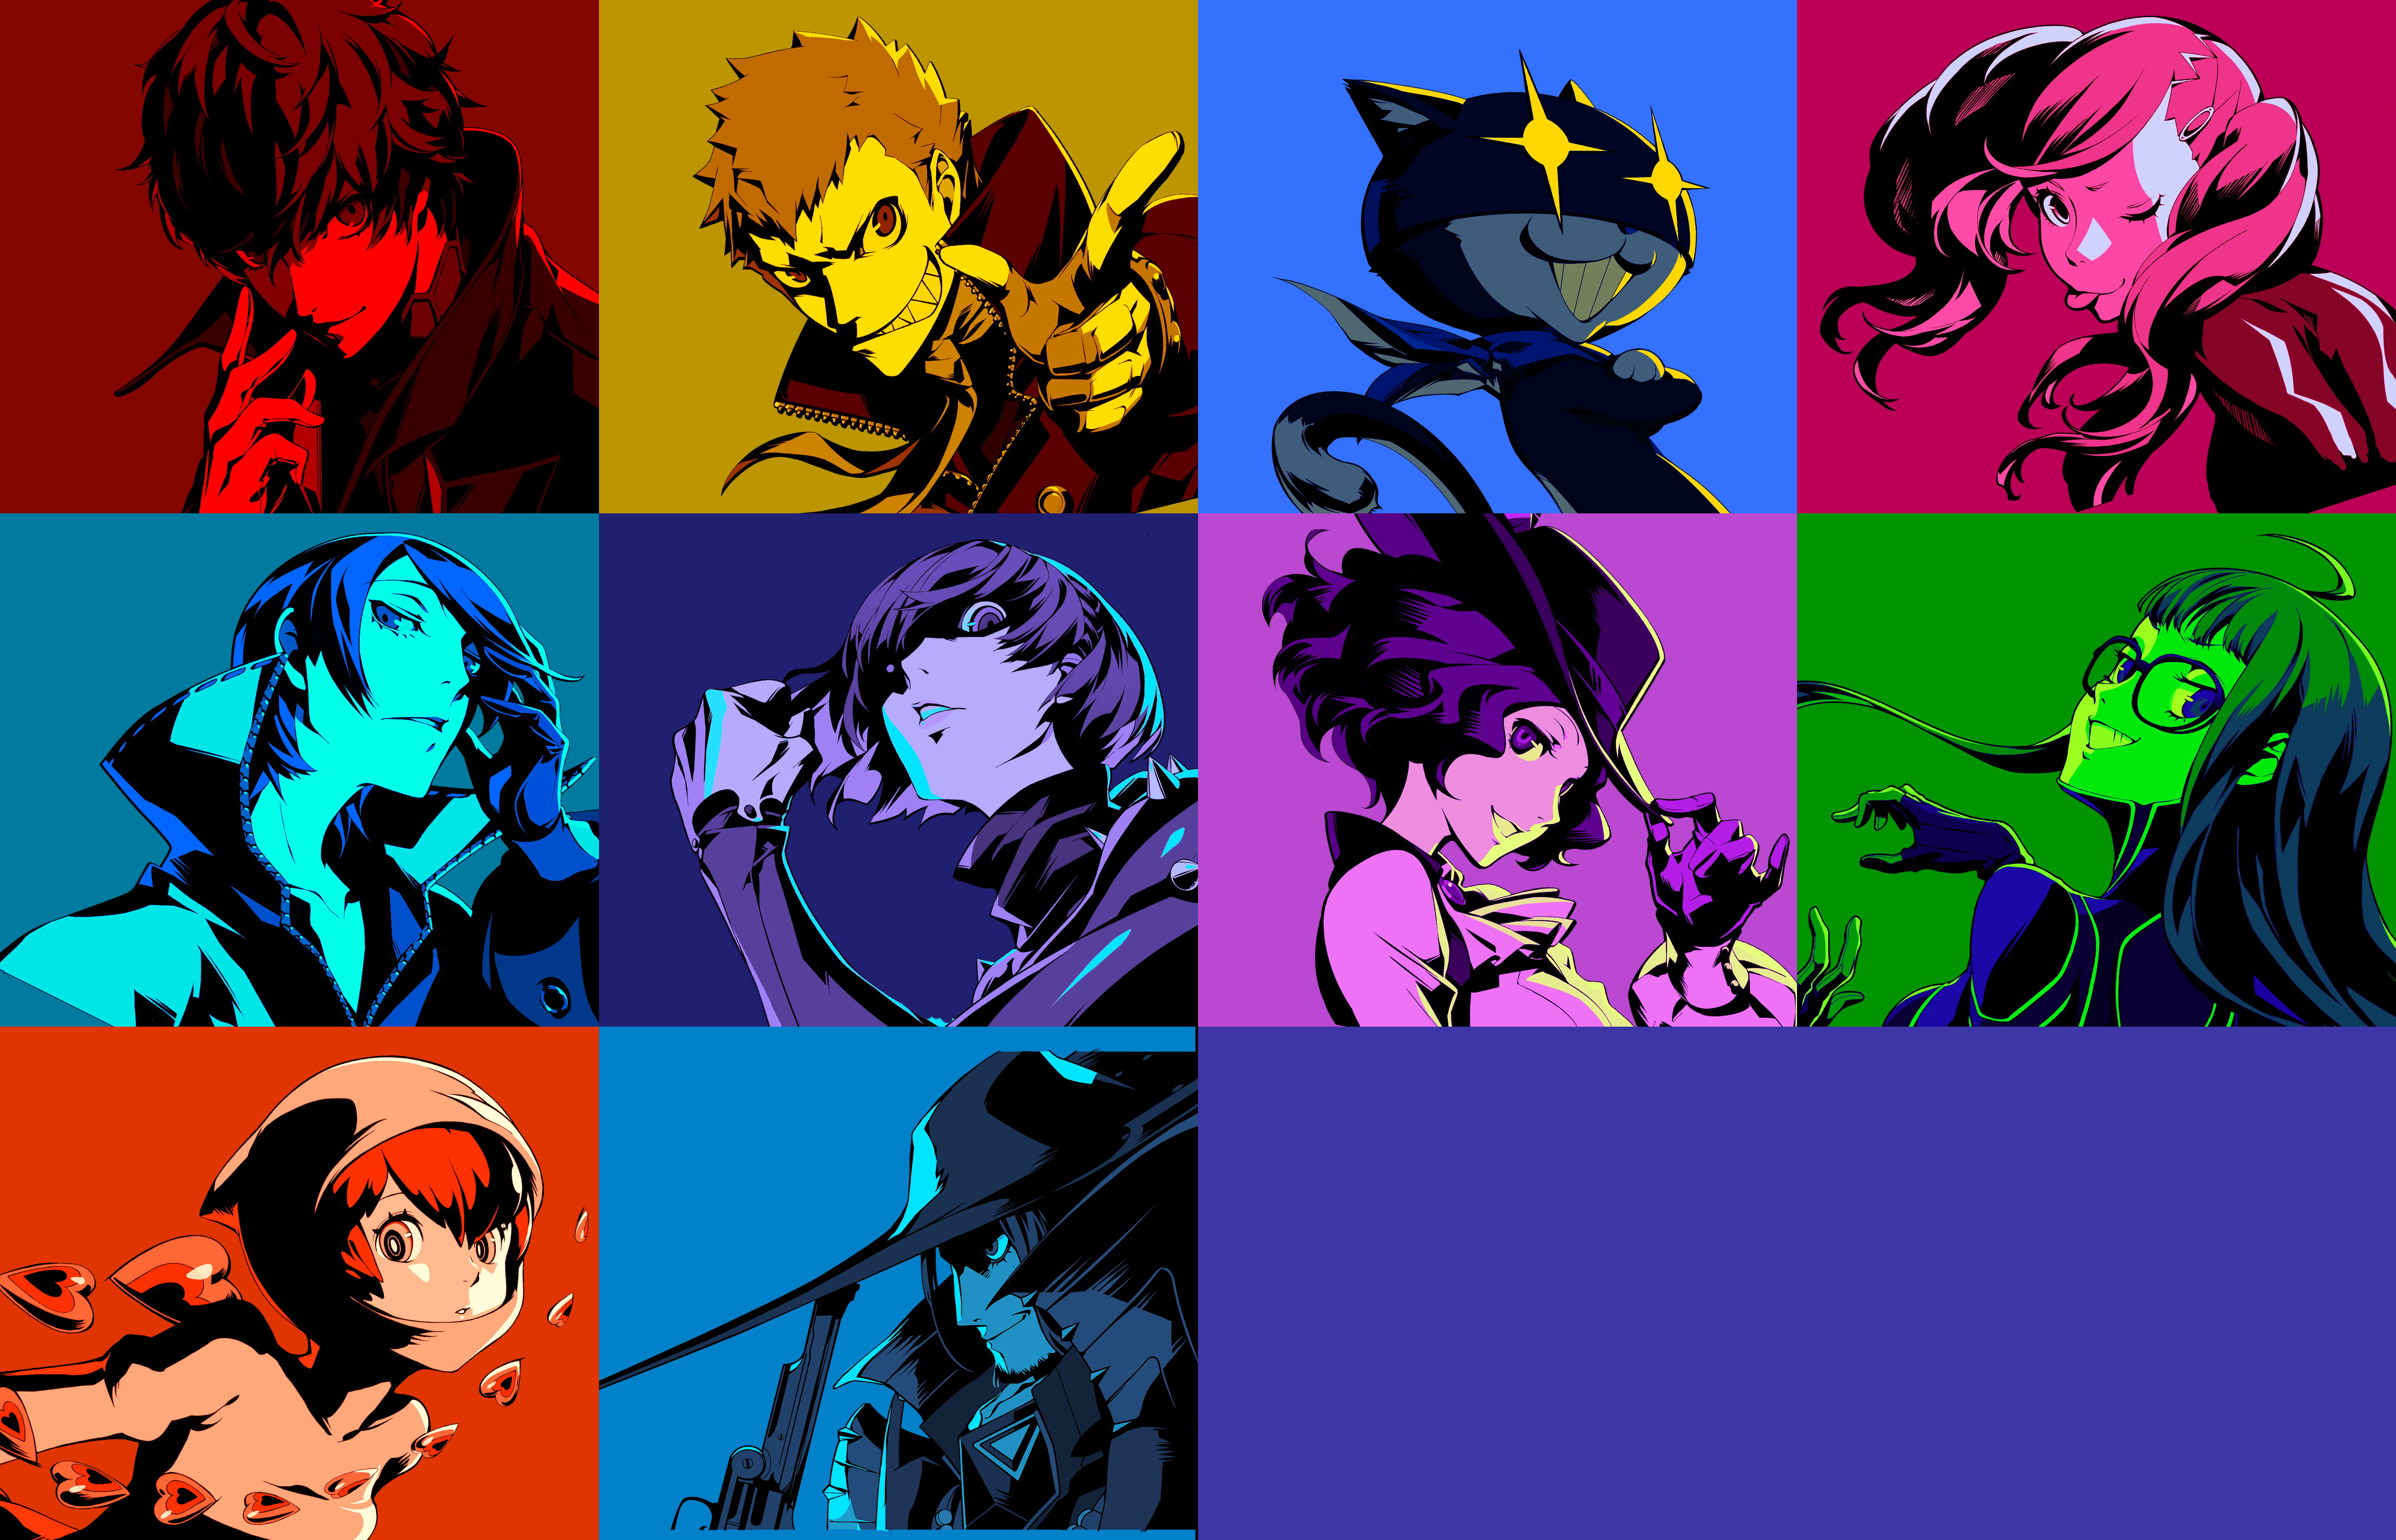 Persona 5 Strikers - Wanted Images